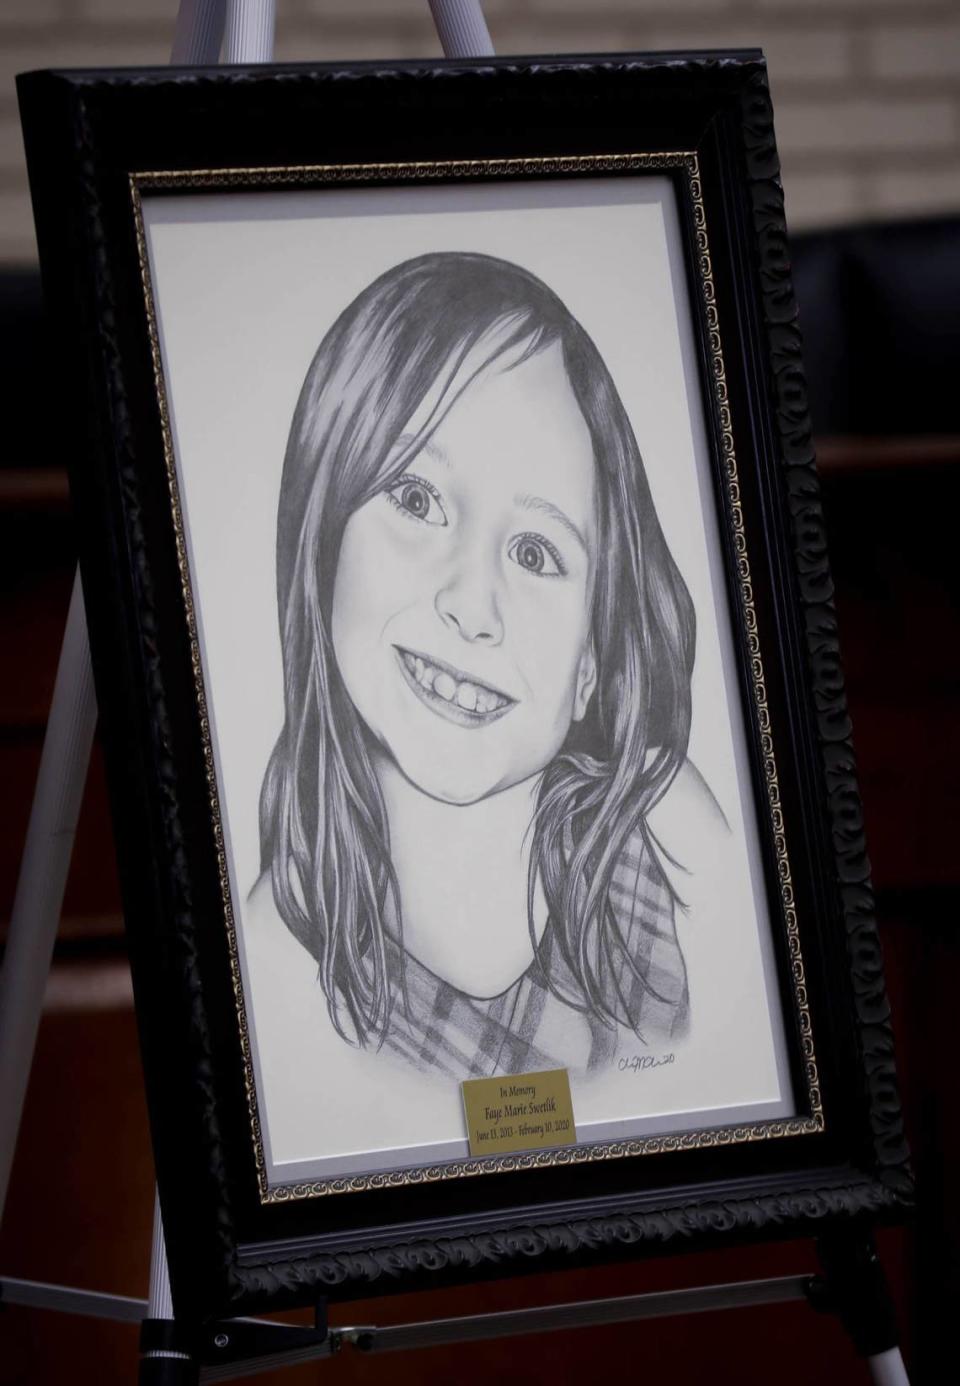 An employee of Cayce Department of Public Safety drew a portrait of 6-year-old Faye Swetlik. The portrait hangs in Director Brian Sterling’s office. Swetlik was abducted from her yard in Cayce in February, 2020.